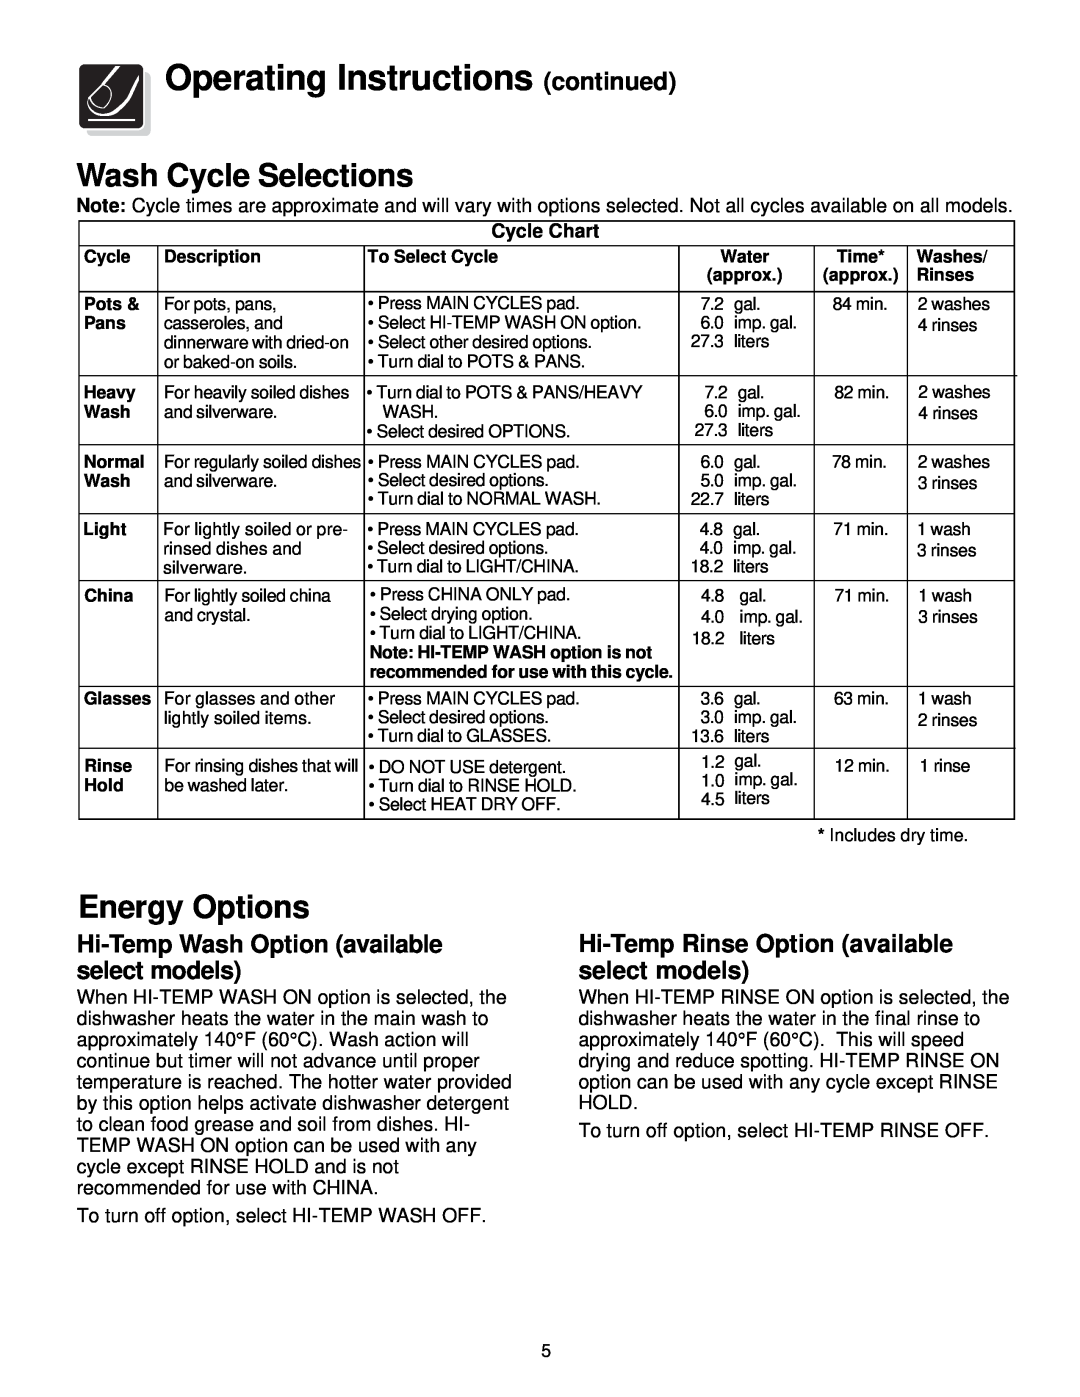 Frigidaire 500, 200, 800, 700 warranty Operating Instructions continued, Wash Cycle Selections, Energy Options 